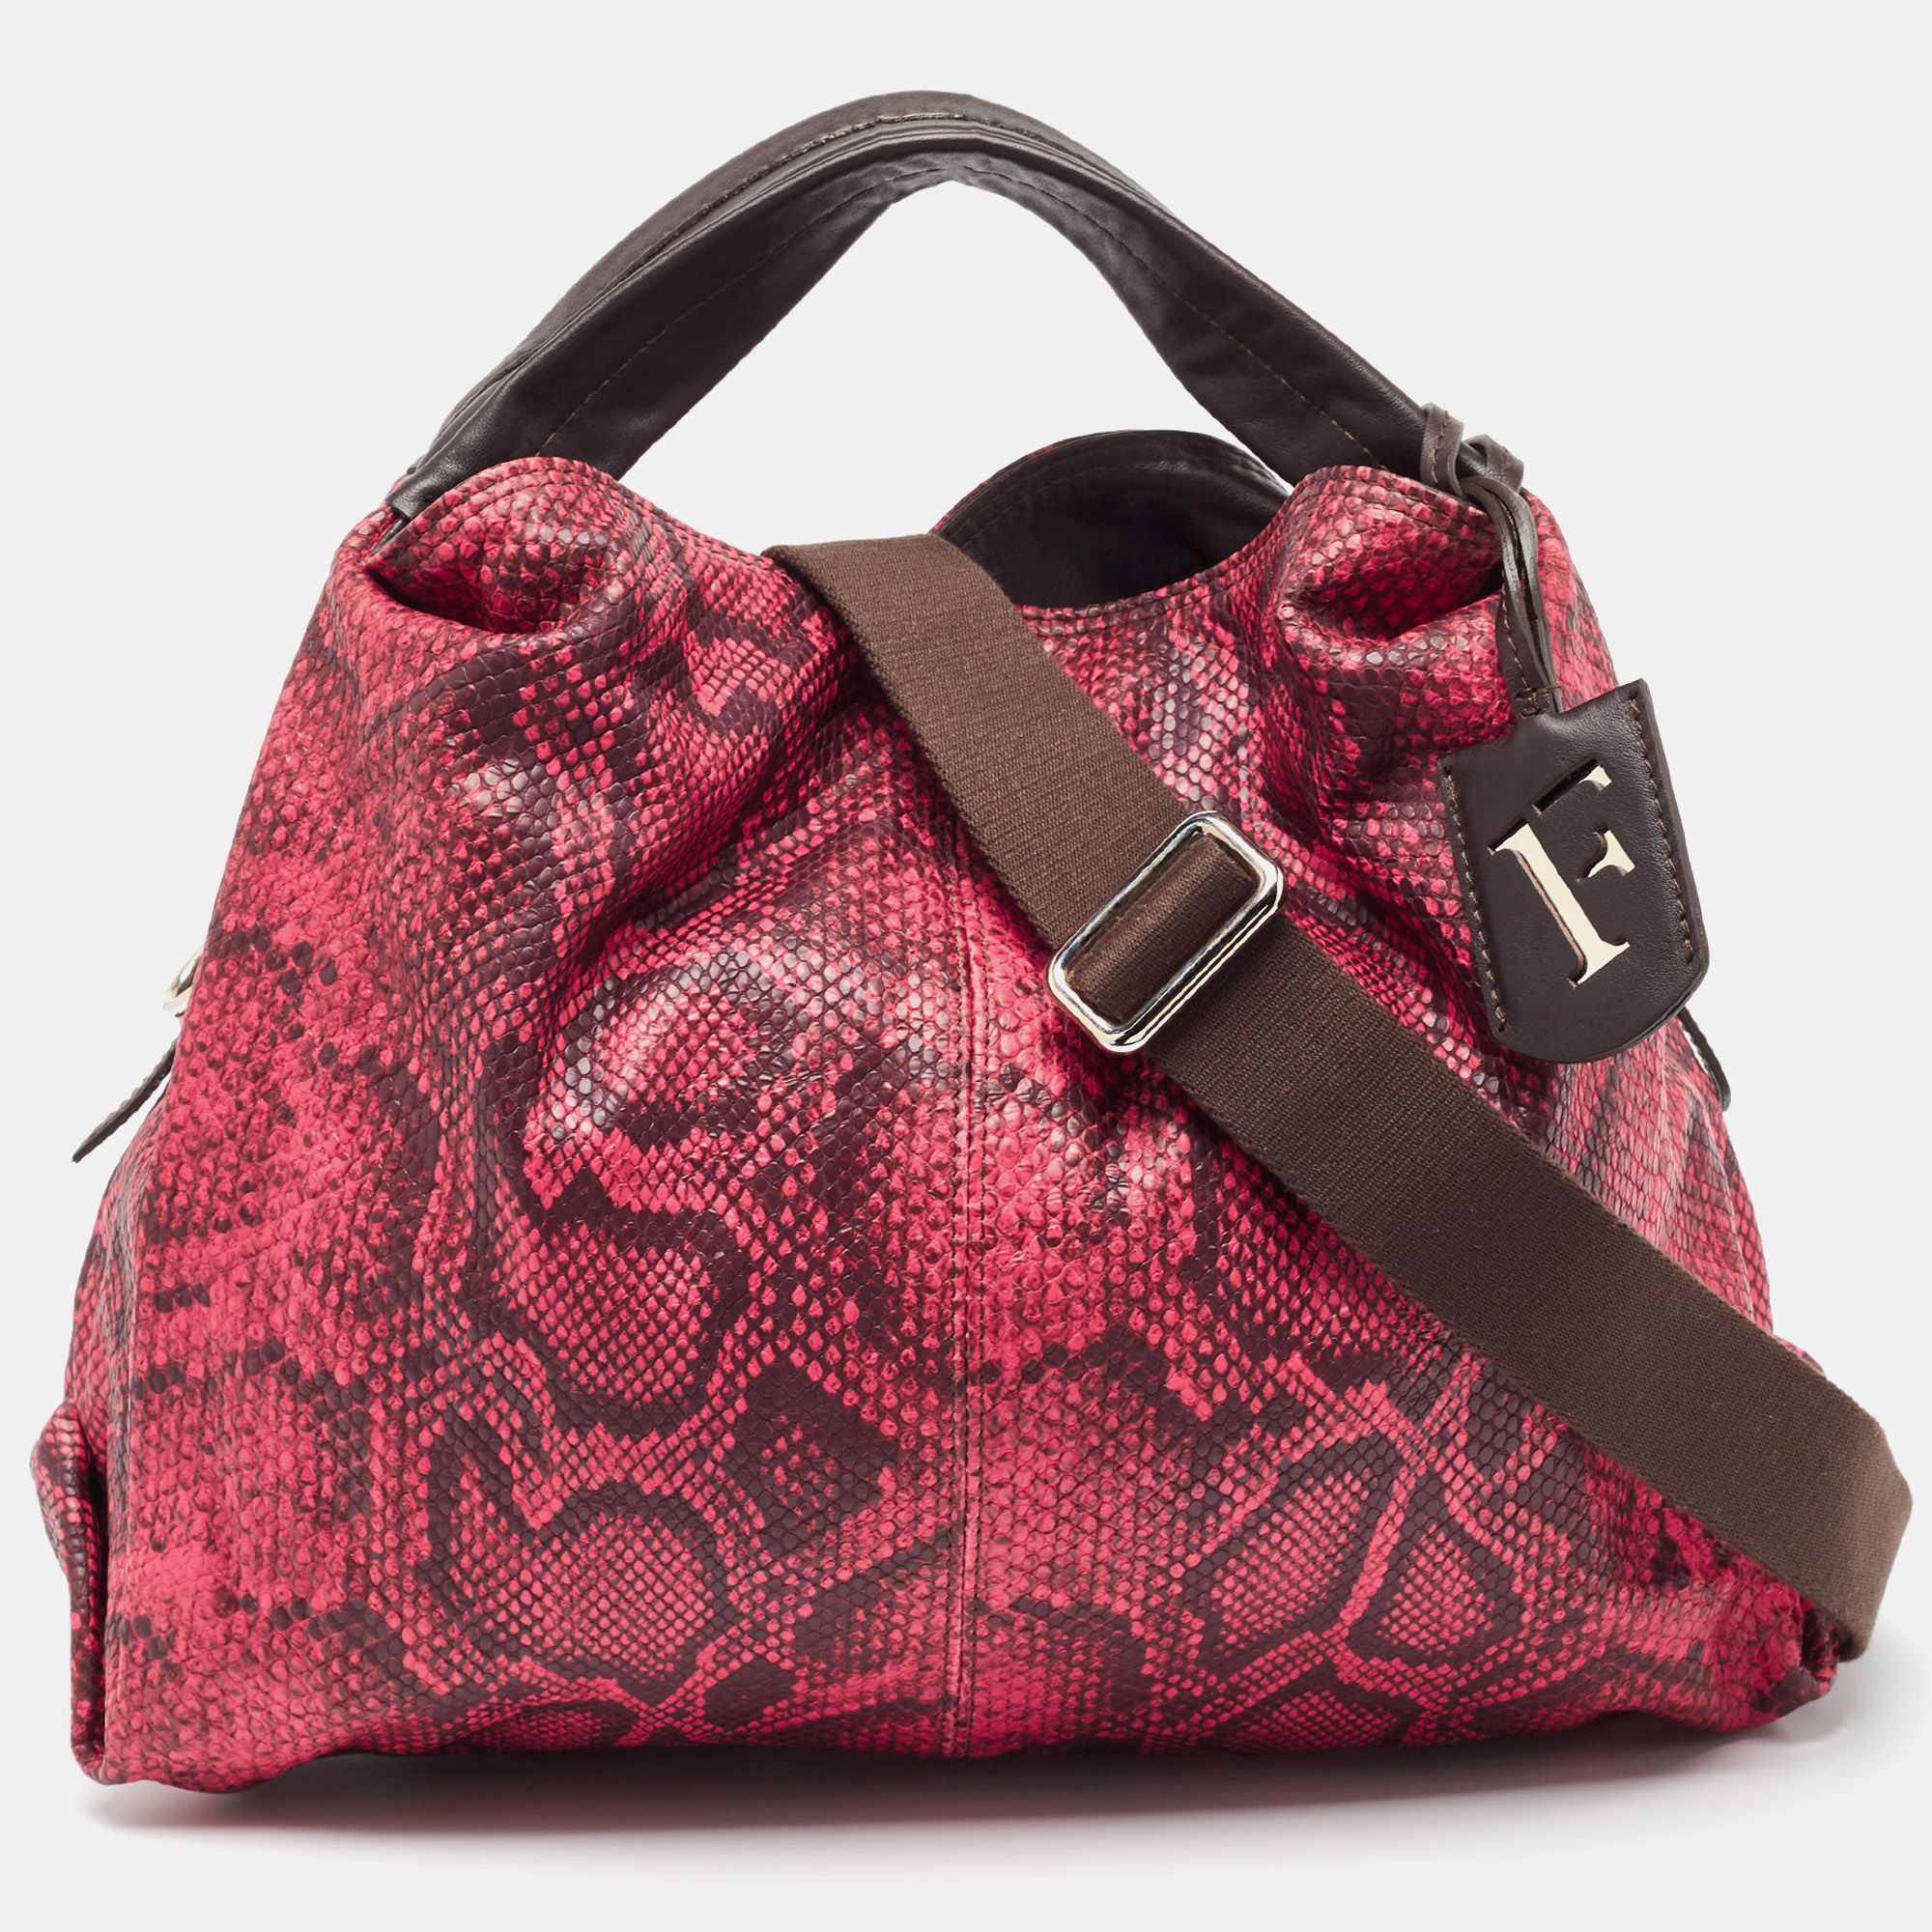 Furla red/brown python embossed and leather hobo